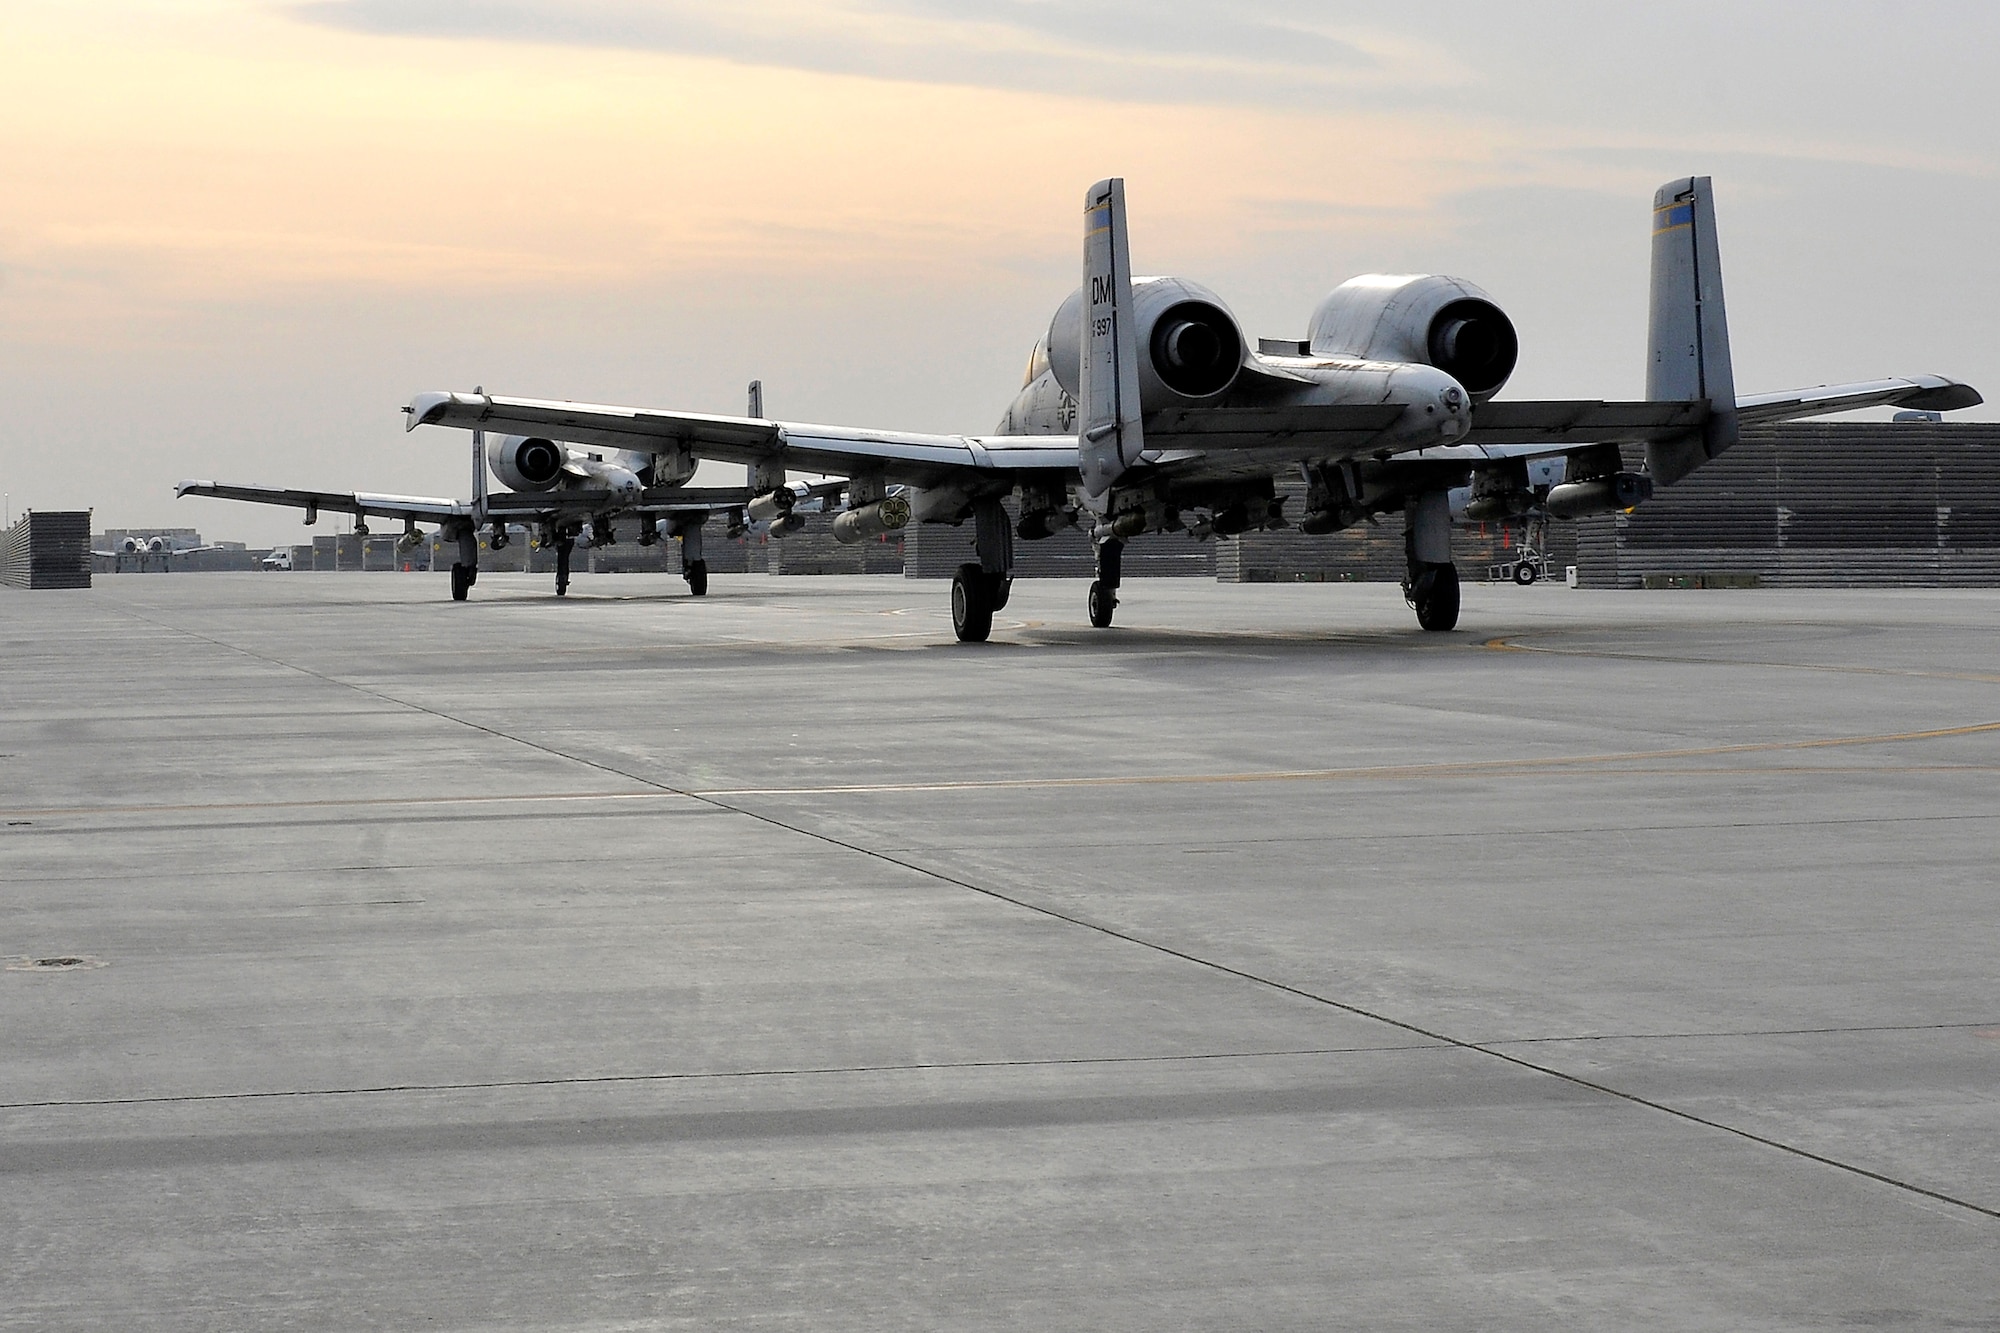 A-10 Thunderbolt II’s taxi to their parking spots after a close air support mission at Bagram Airfield, Afghanistan, Nov. 27, 2012. The A-10 is part of a squadron of “Warthogs” that recently arrived from Davis-Monthan Air Force Base, Az., to fly missions in support of American and coalition forces here in Afghanistan. (U.S. Air Force photo/Senior Airman Chris Willis)